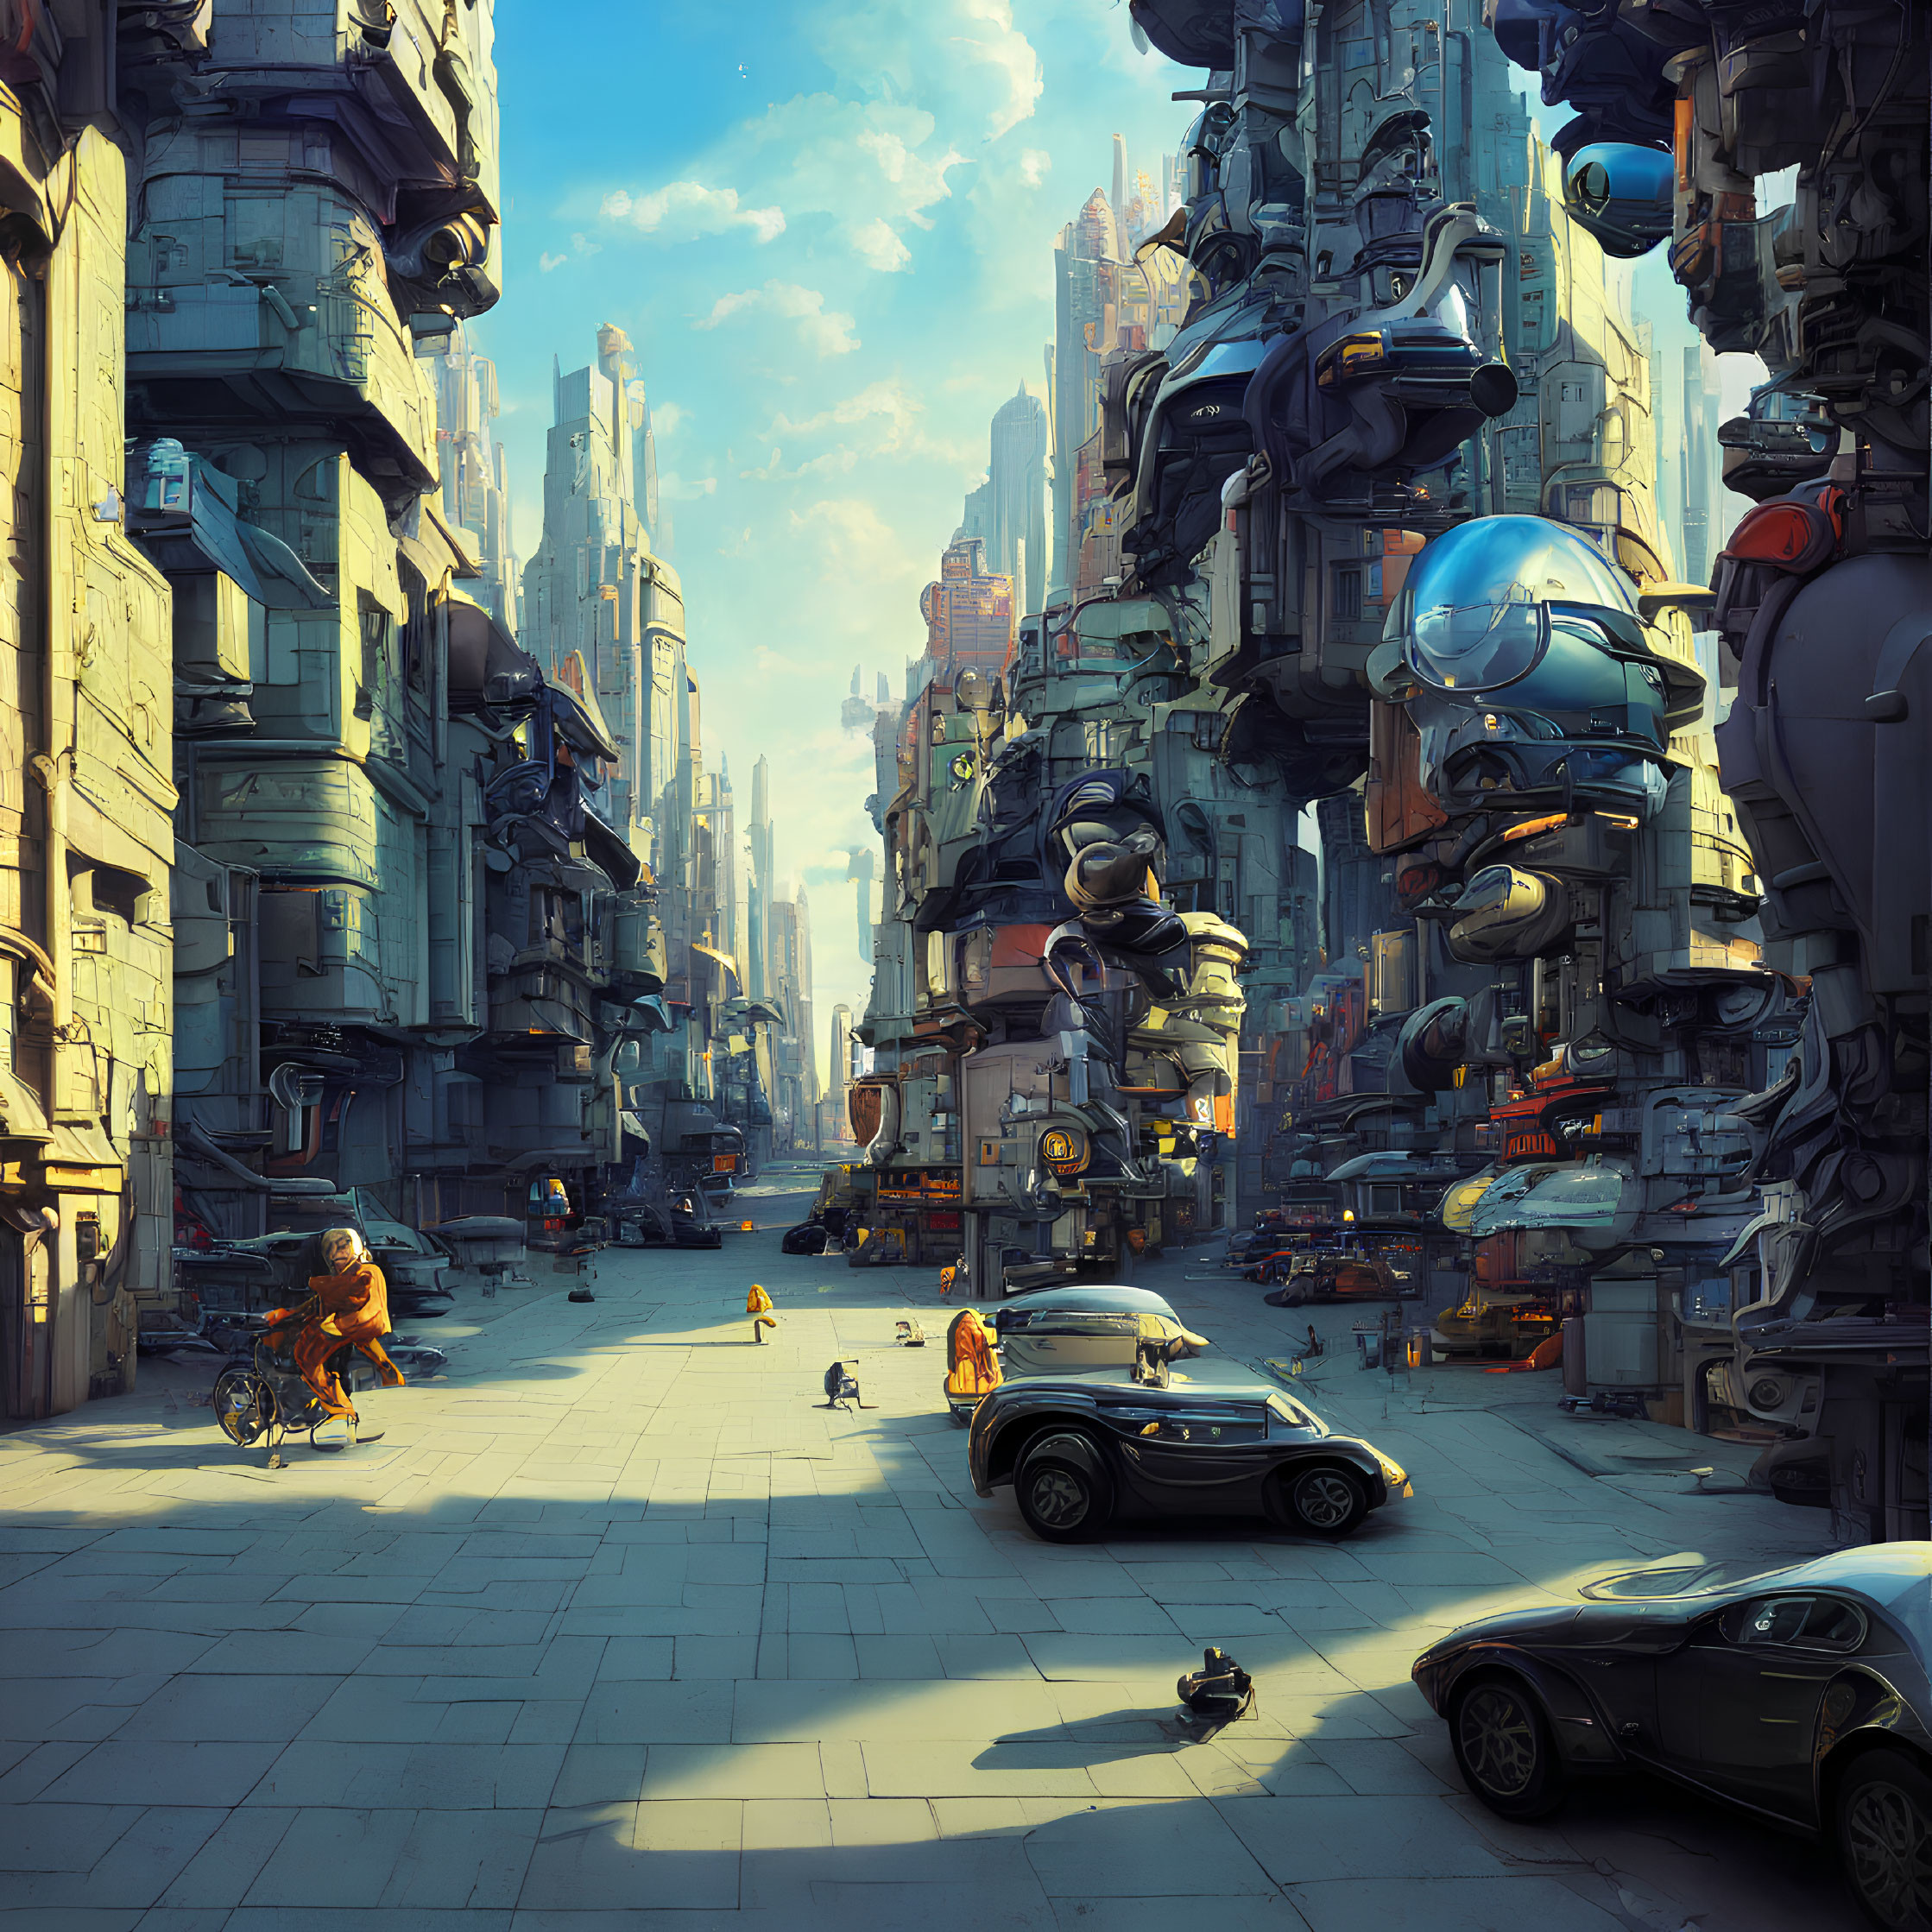 Futuristic cityscape with flying vehicles and robots